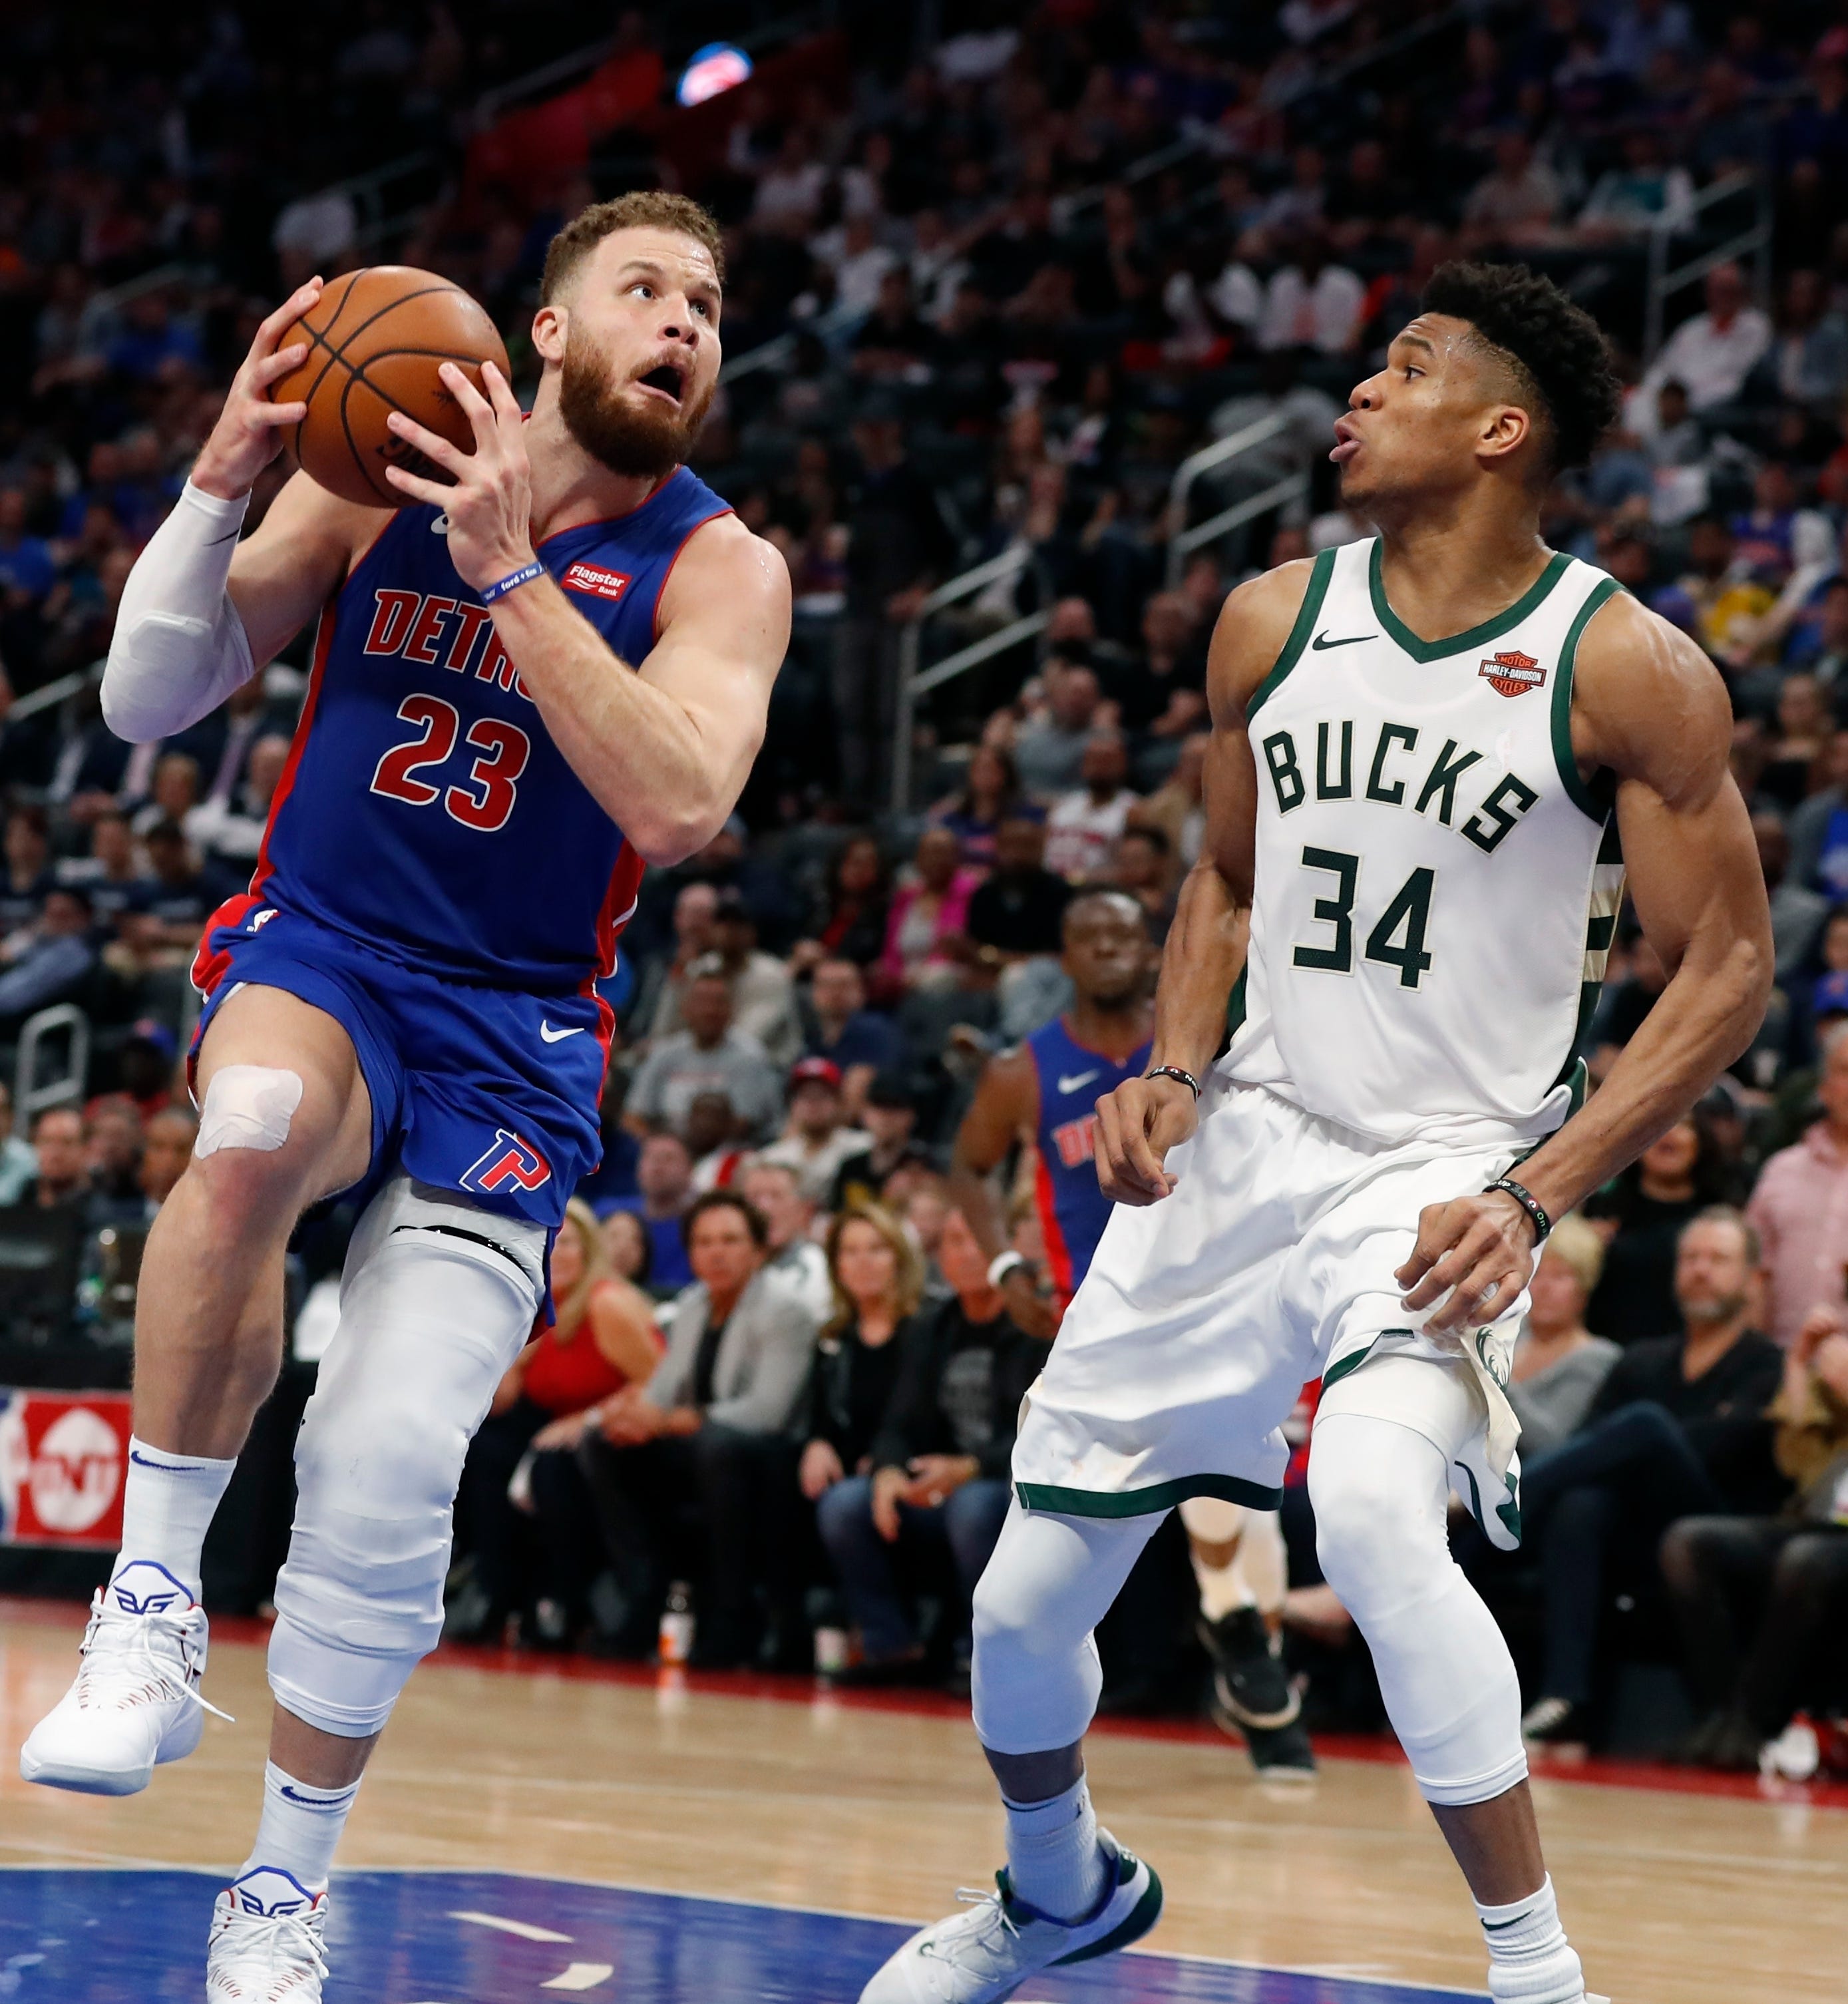 1. PF Blake Griffin, age 30: If there was any question about Griffin’s value, the evidence is in the seven games he missed in the regular season — the Pistons went 2-5 — and the two most lopsided losses in the playoffs. Griffin was voted third-team All-NBA, was an All-Star and had the best season of his career. Despite his huge contract, the Pistons’ short term-future is tied to Griffin.